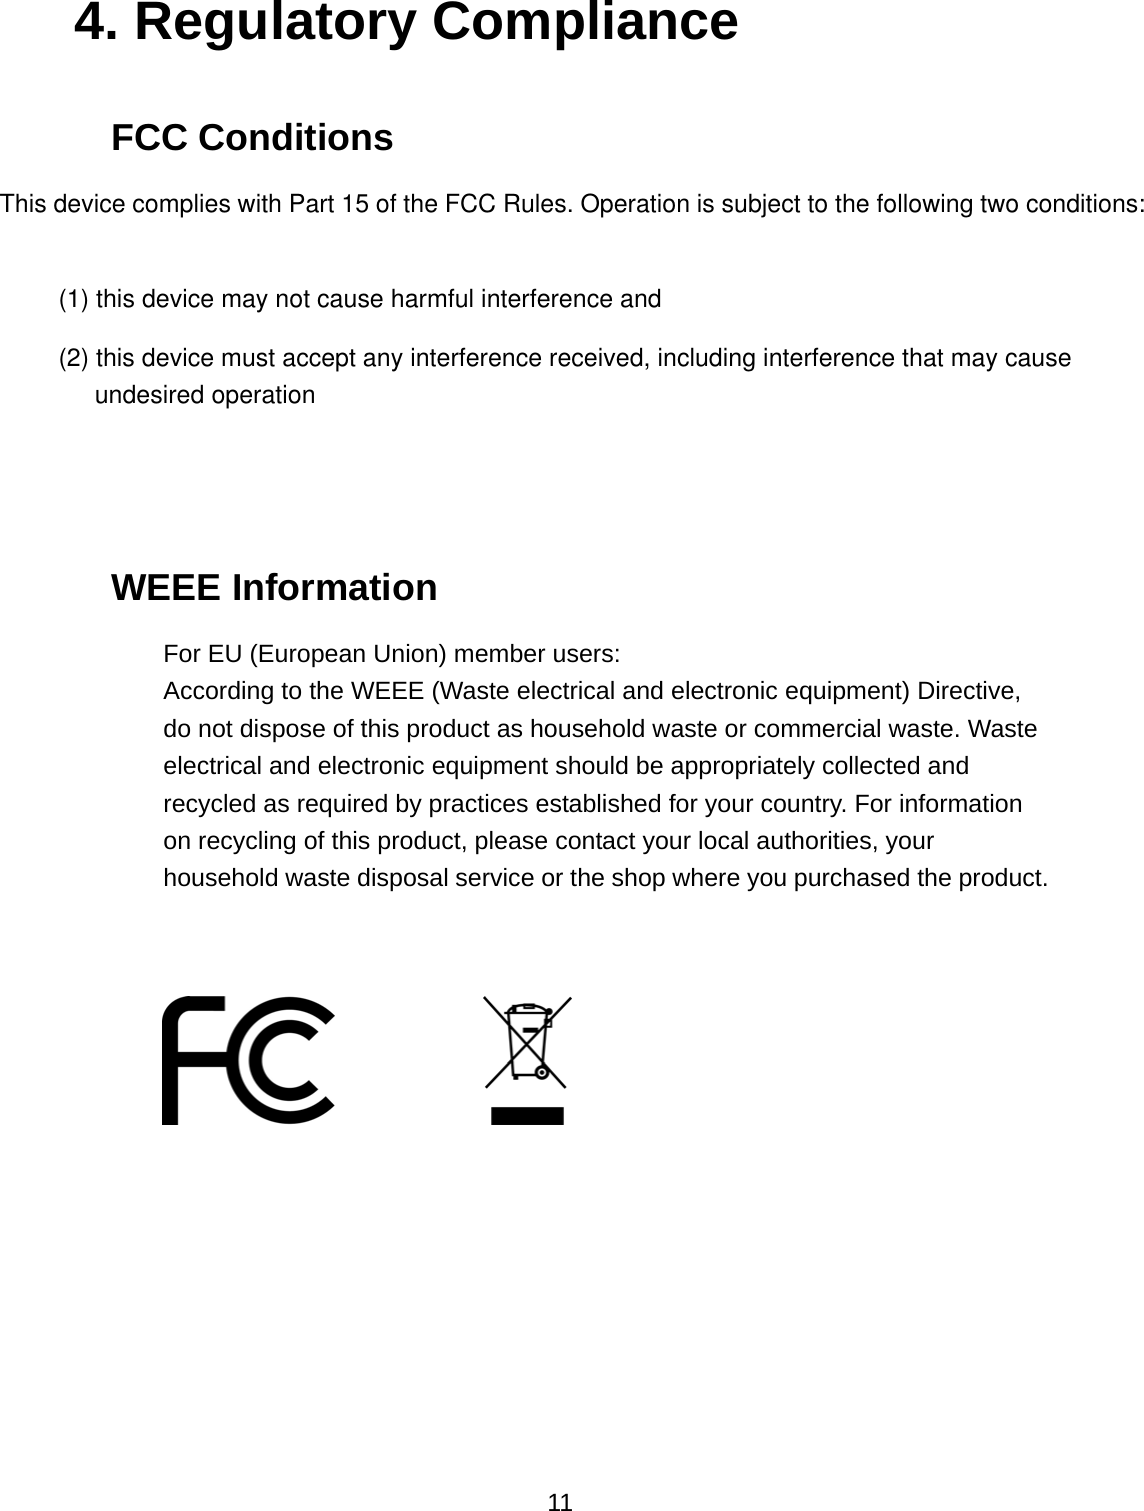  11 4. Regulatory Compliance FCC Conditions This device complies with Part 15 of the FCC Rules. Operation is subject to the following two conditions:(1) this device may not cause harmful interference and  (2) this device must accept any interference received, including interference that may cause undesired operation   WEEE Information For EU (European Union) member users:   According to the WEEE (Waste electrical and electronic equipment) Directive, do not dispose of this product as household waste or commercial waste. Waste electrical and electronic equipment should be appropriately collected and recycled as required by practices established for your country. For information on recycling of this product, please contact your local authorities, your household waste disposal service or the shop where you purchased the product.                  